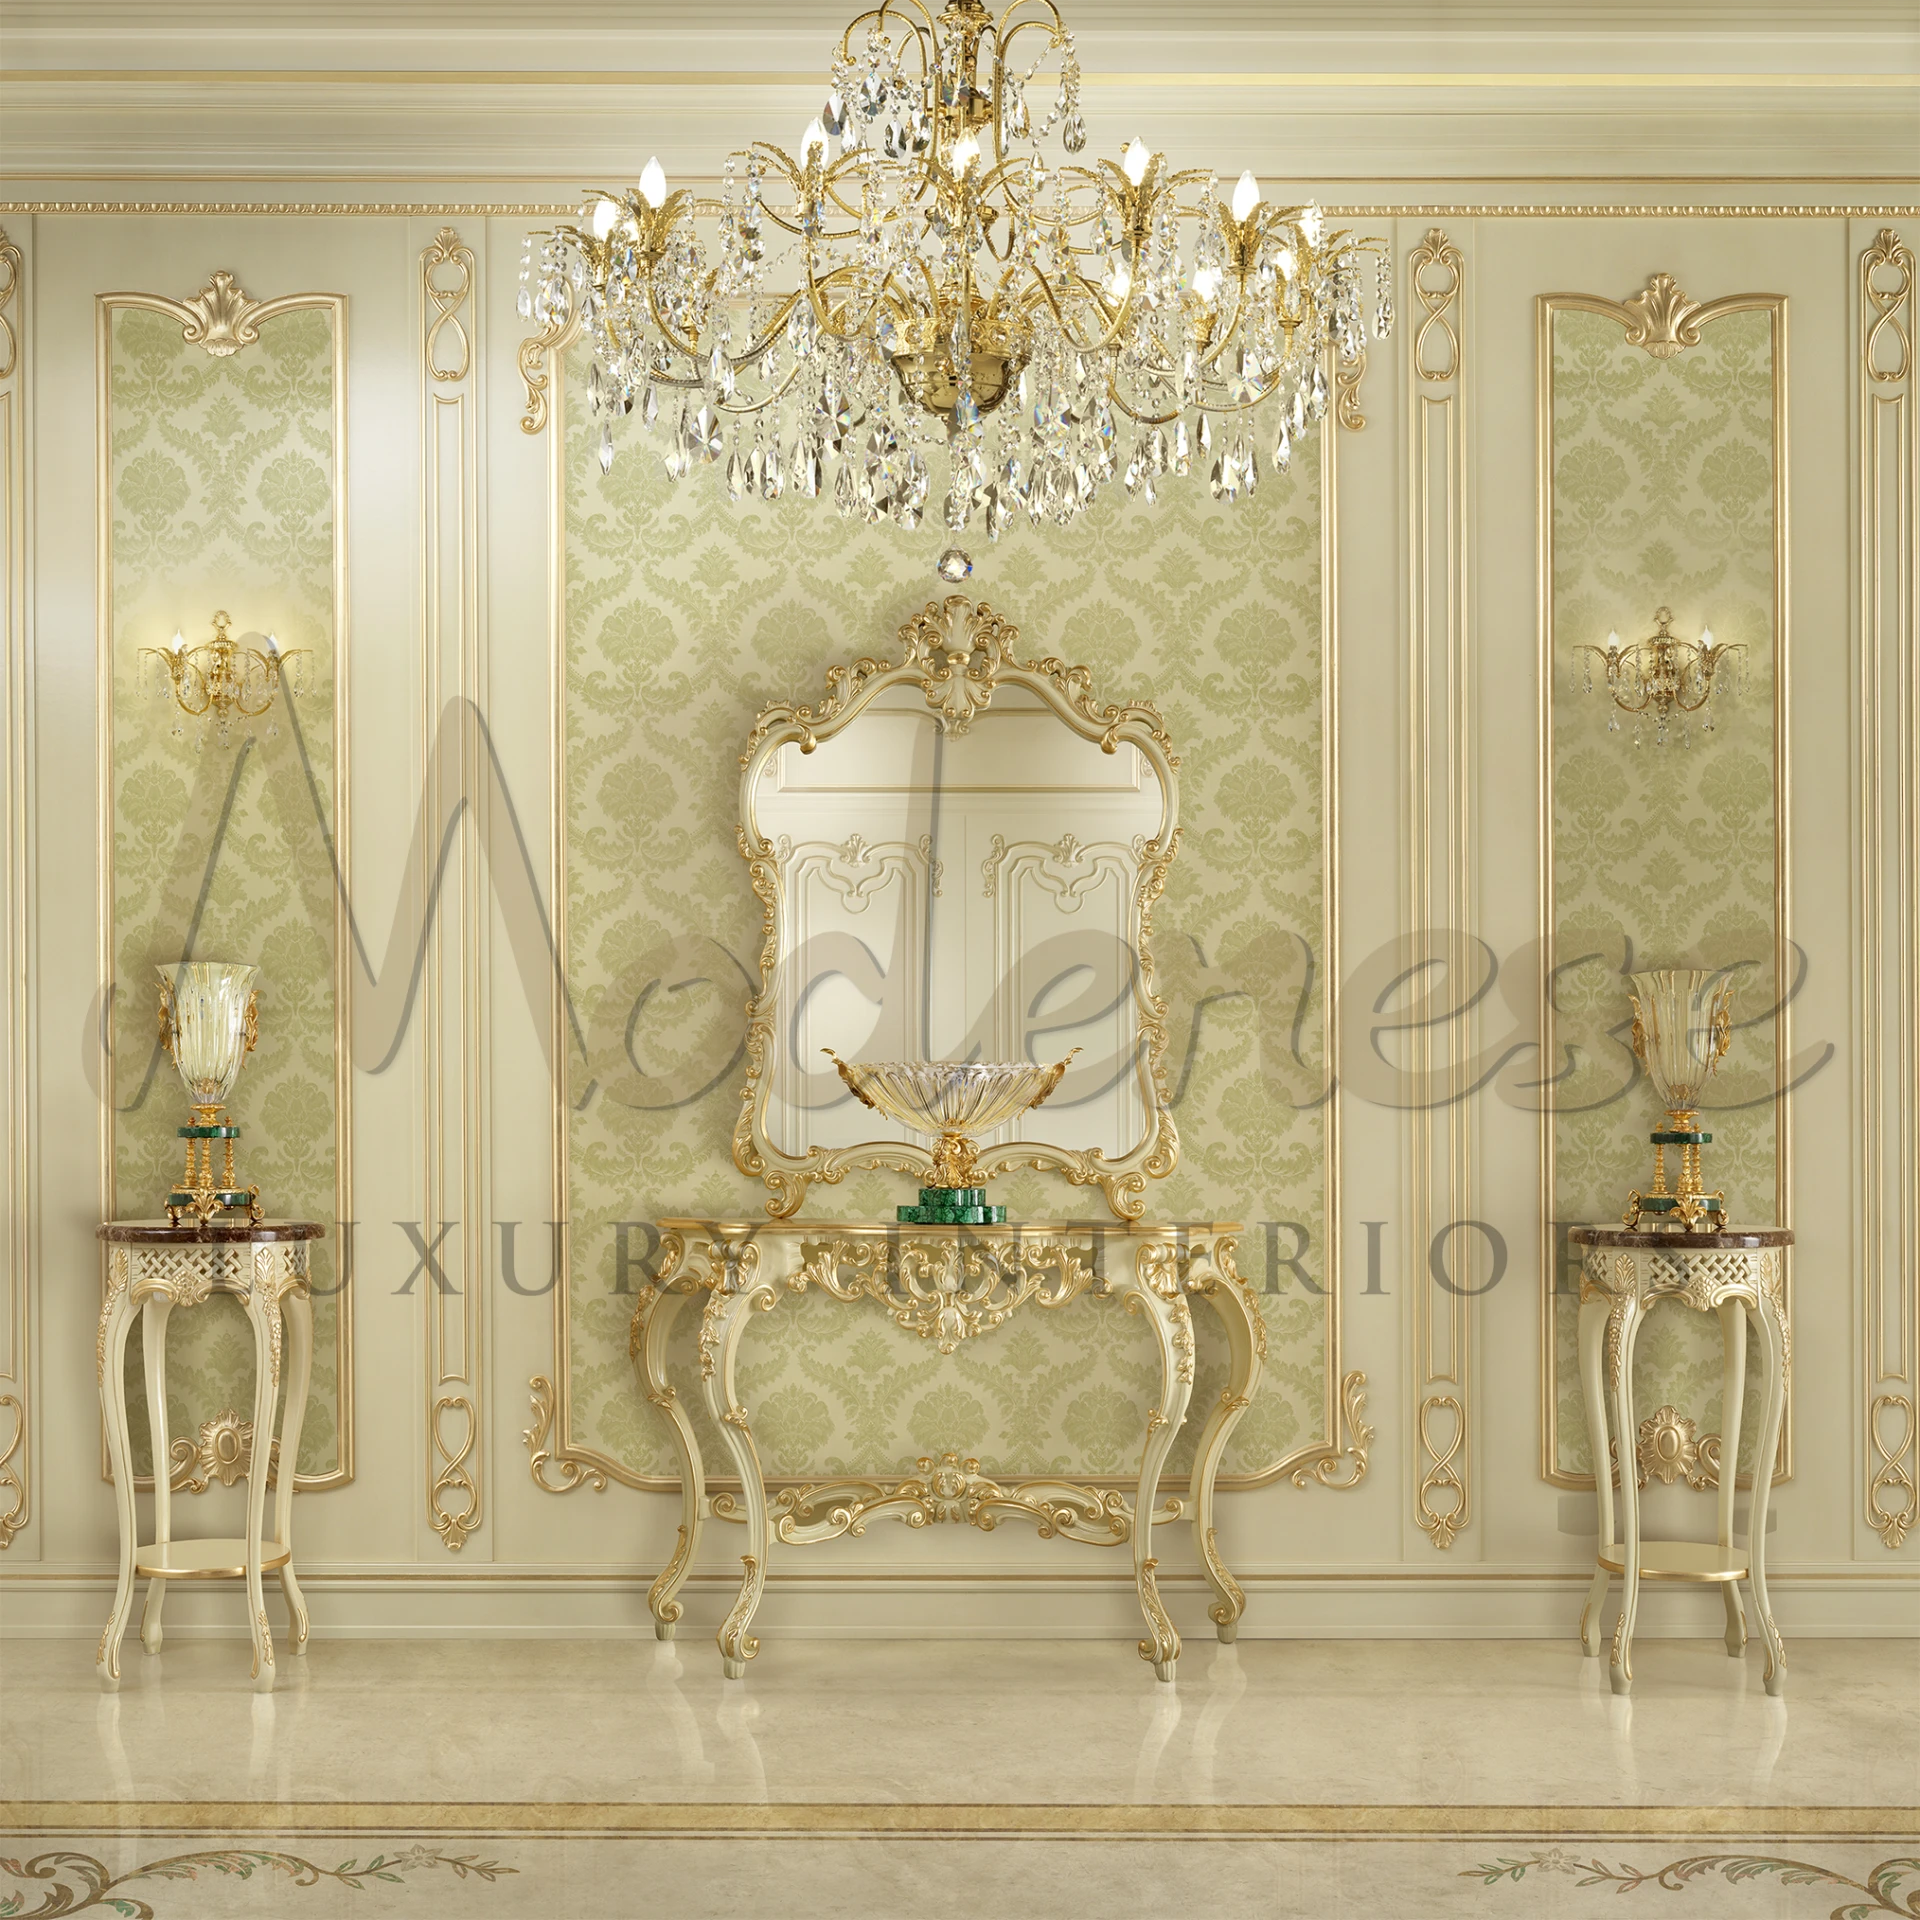 Luxurious Hand-Crafted Console Table, featuring exquisite gold or silver leaf gilding.